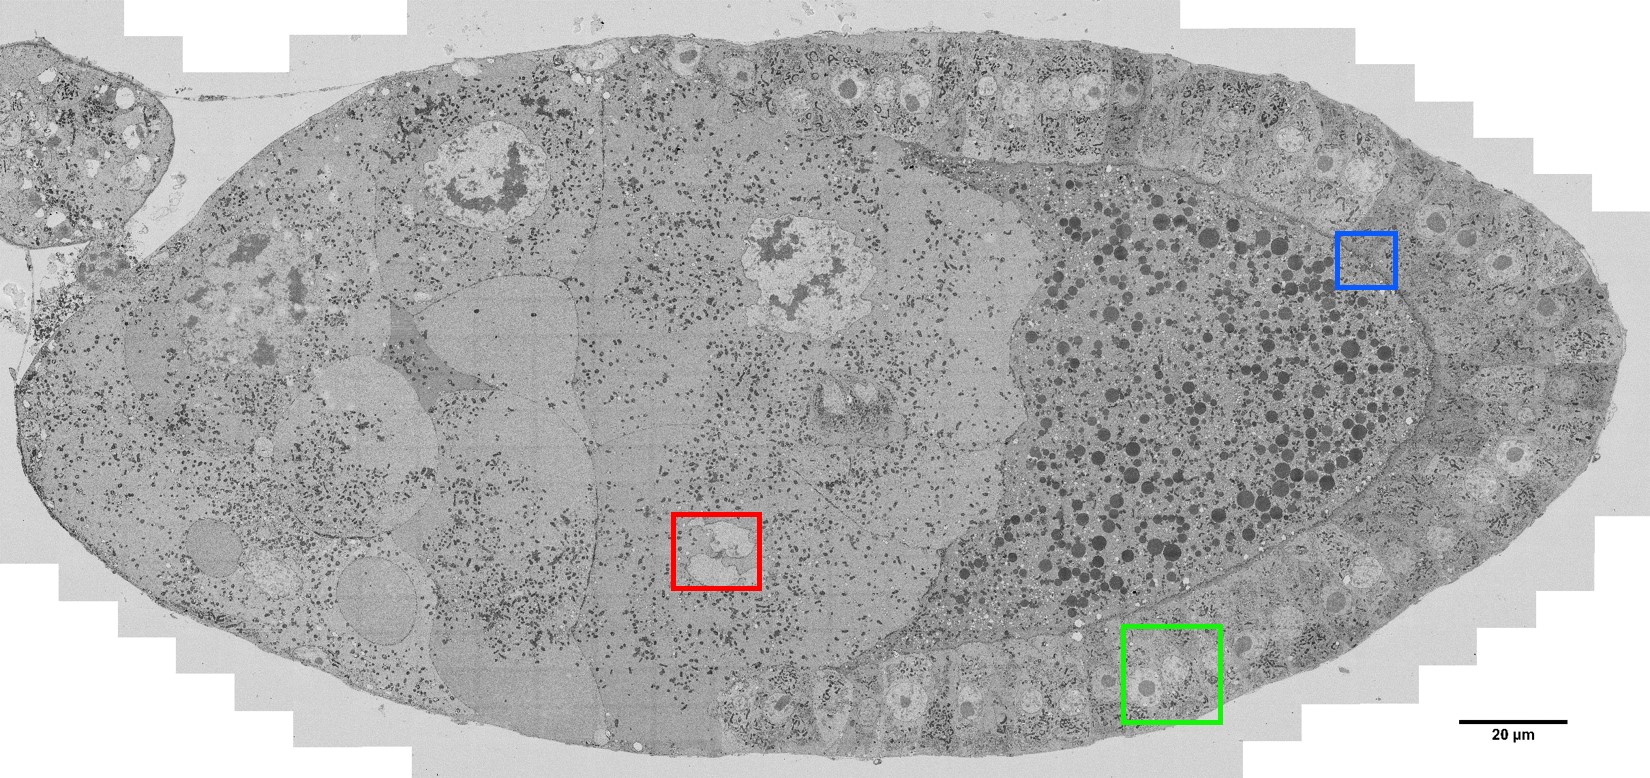 High-resolution map of a Drosophila melanogaster egg chamber: the area of the nurse cells to the left and the regular row of follicle cells to the right enclosing the developing oocyte. The areas in the coloured insets are shown in more detail below.